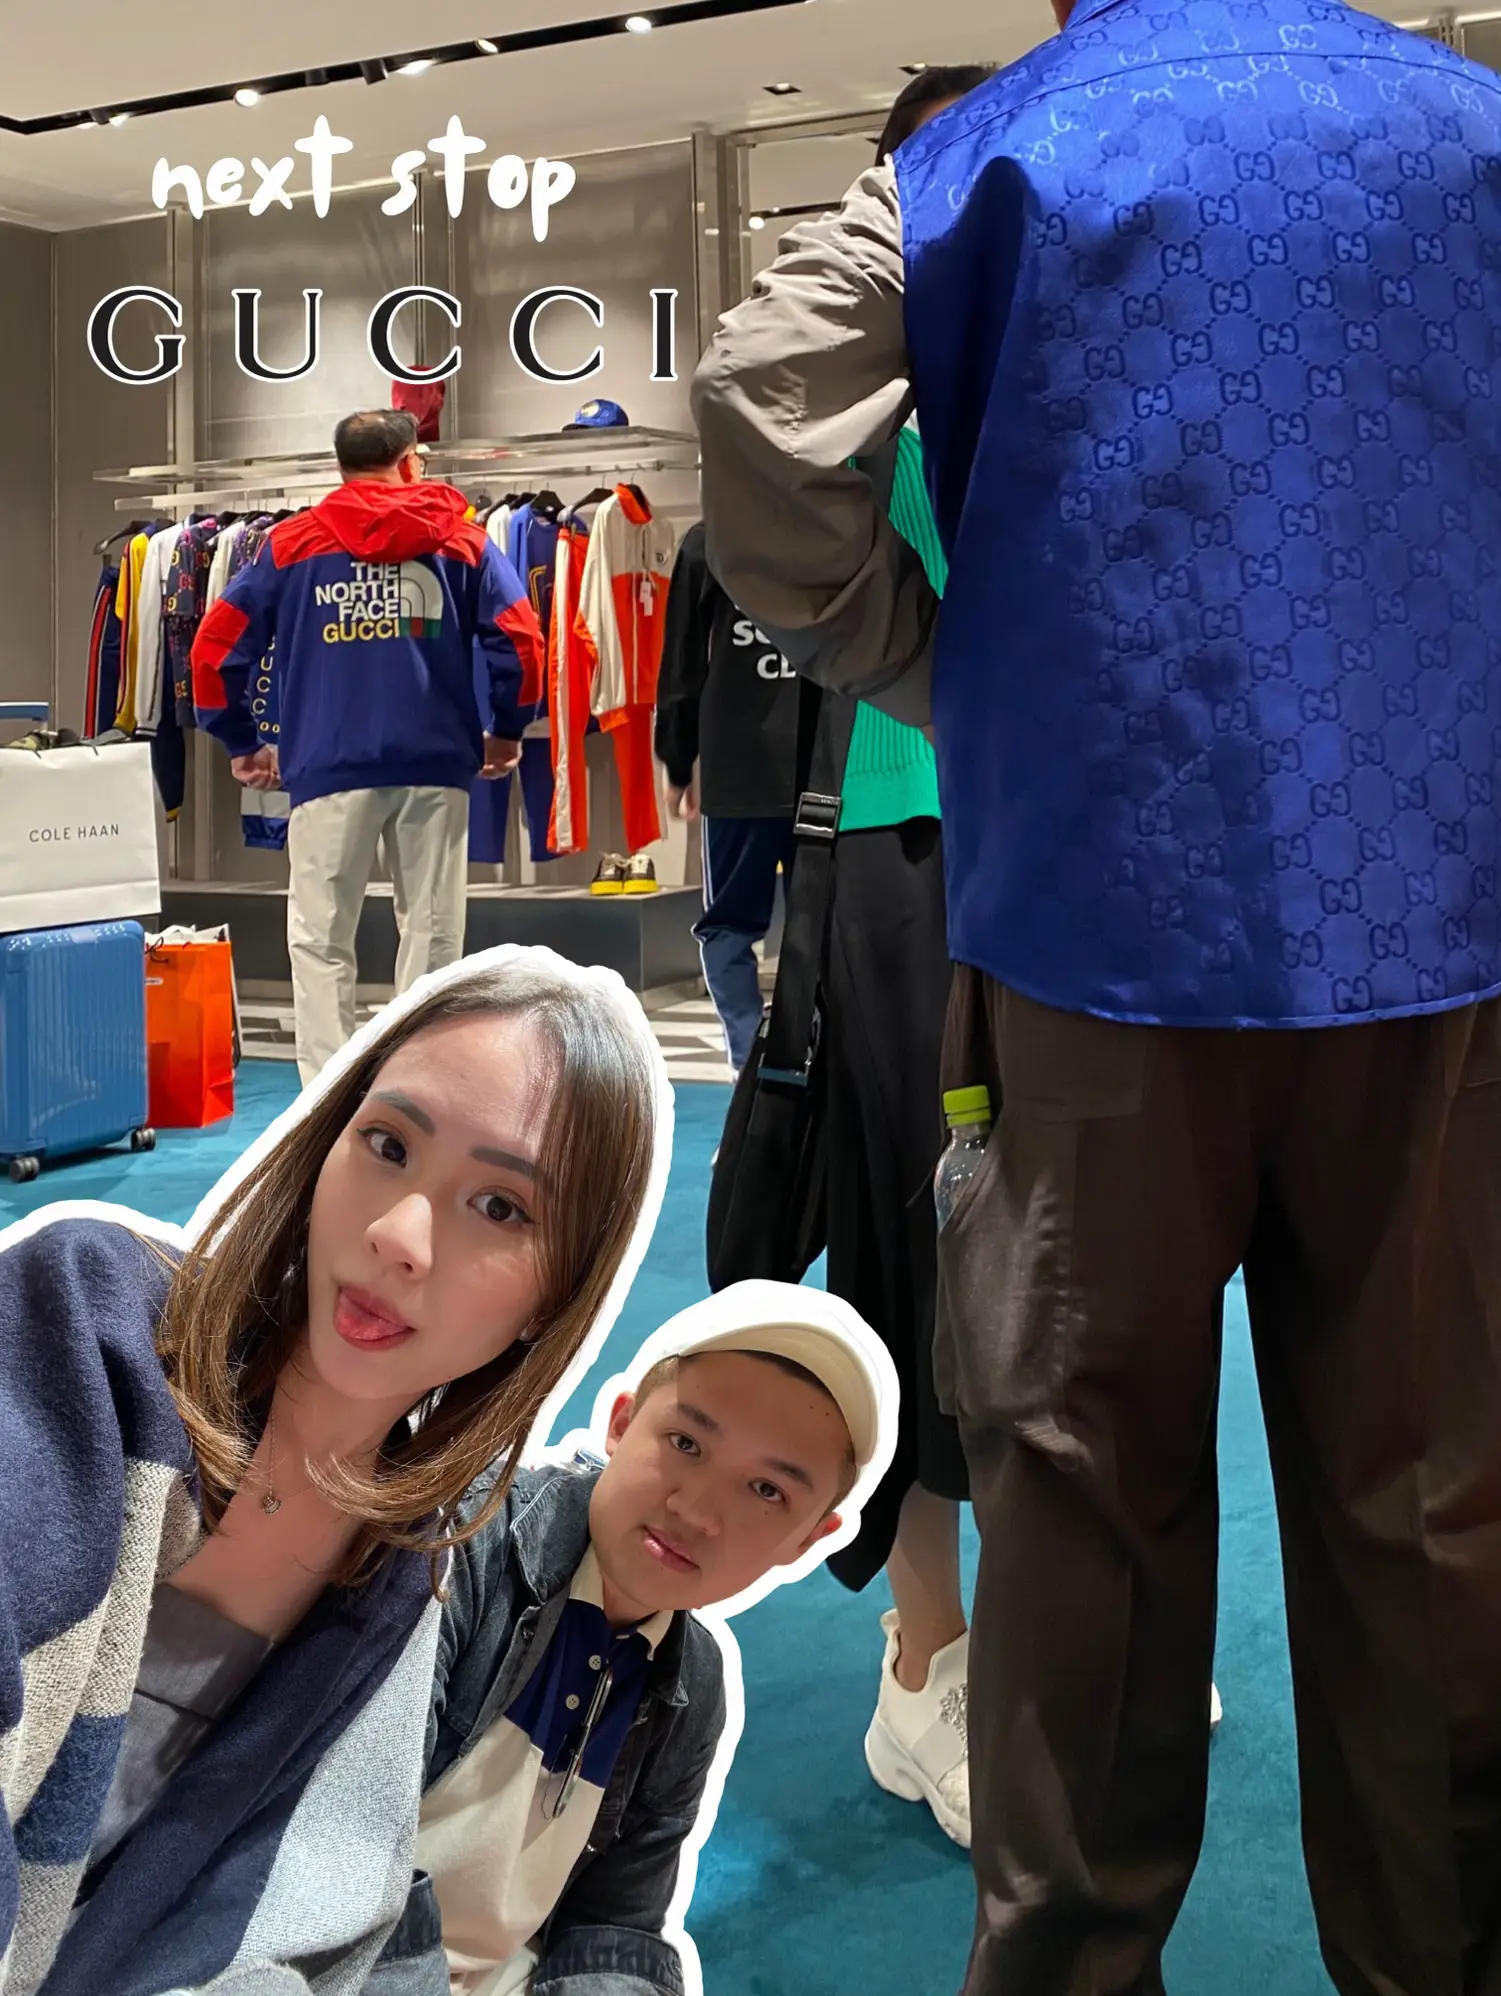 Gucci outlet woodbury commons - Lemon8 Search